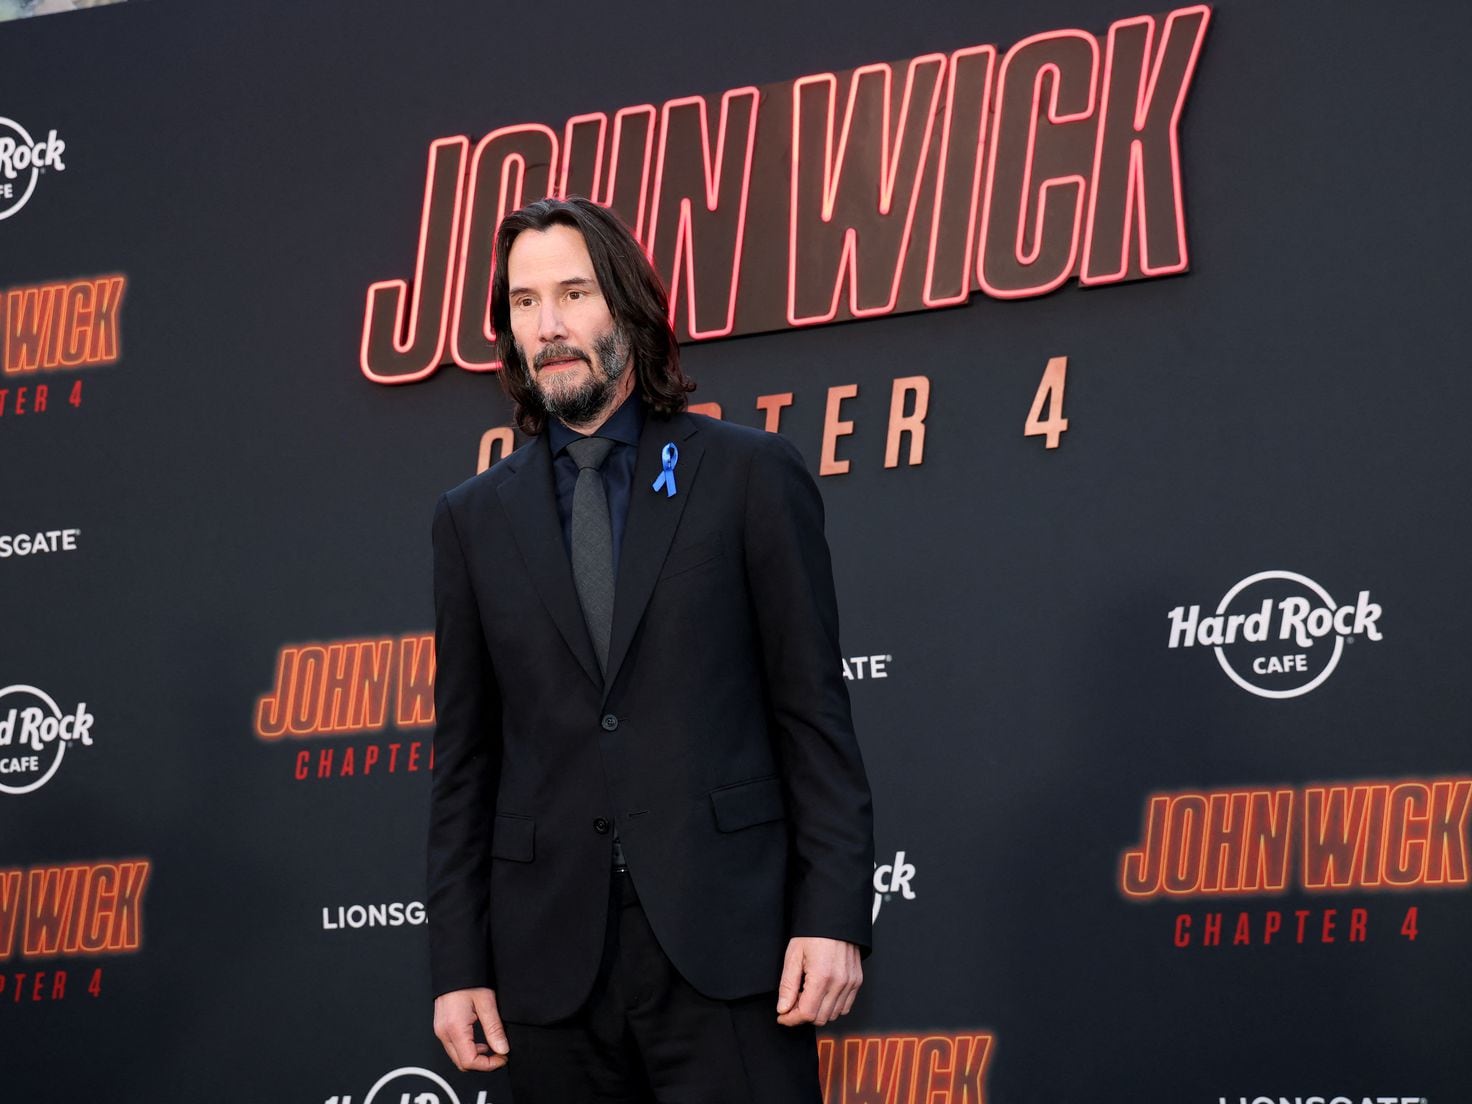 John Wick 5': What We Know So Far